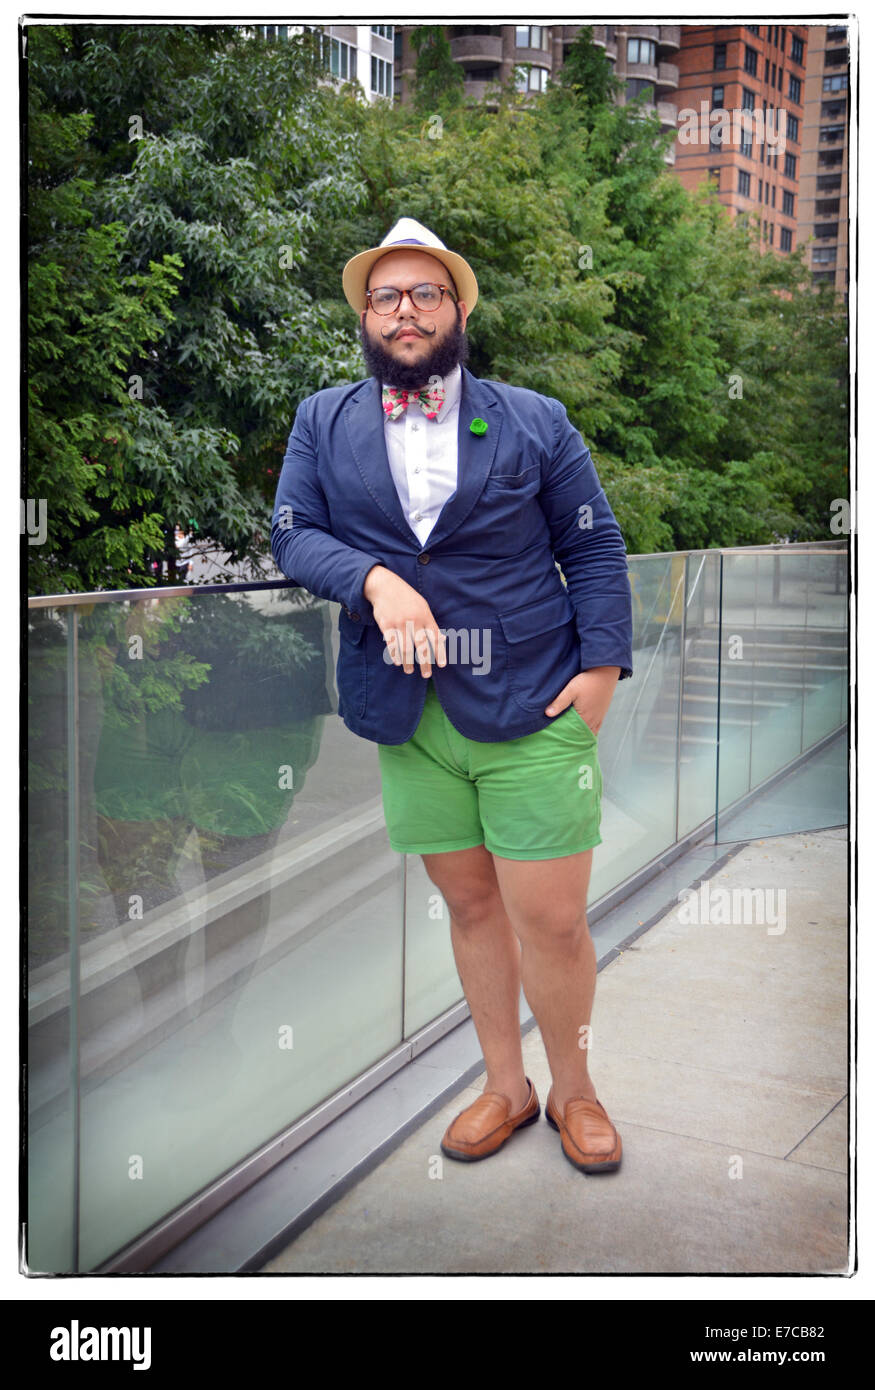 Portrait of a bowtie designer in an unusual outfit at Fashion Week 2014 in New York City. Stock Photo